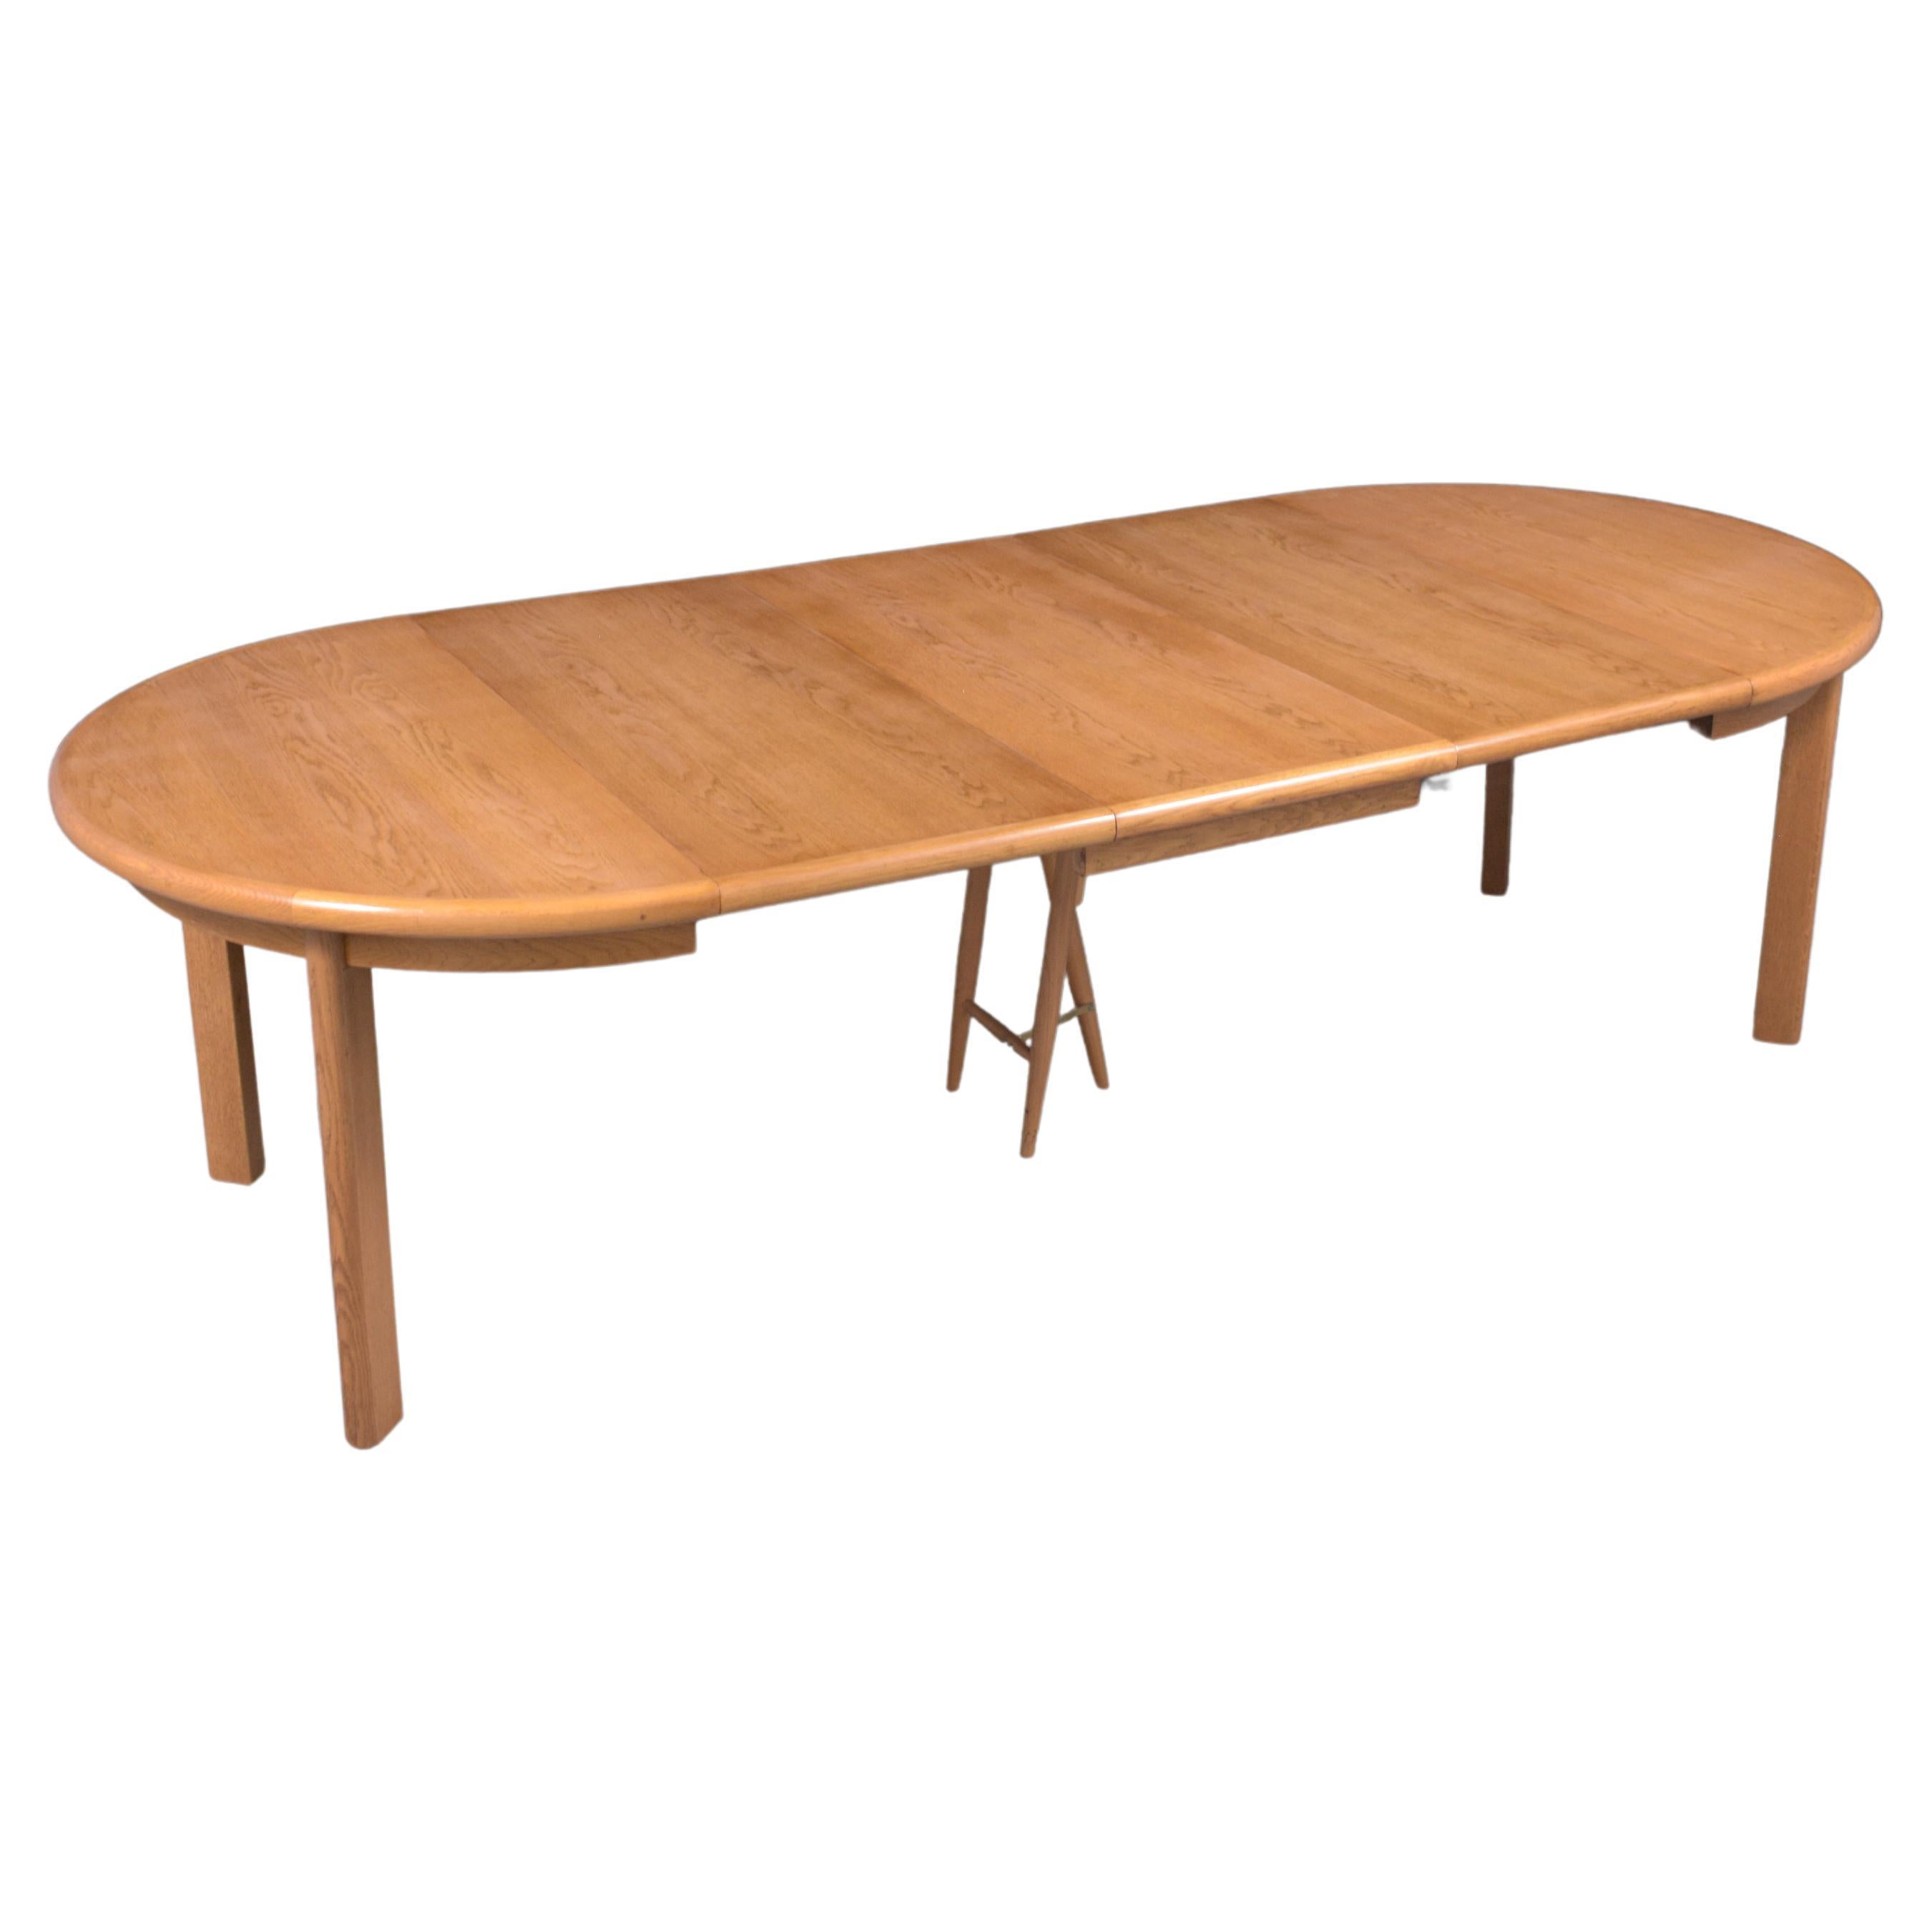 Introducing our stunning 1970s Danish Modern dining table, expertly crafted from teak wood and beautifully restored to pristine condition by our professional in-house craftsman team. This versatile table features a unique dual-shape design: circular